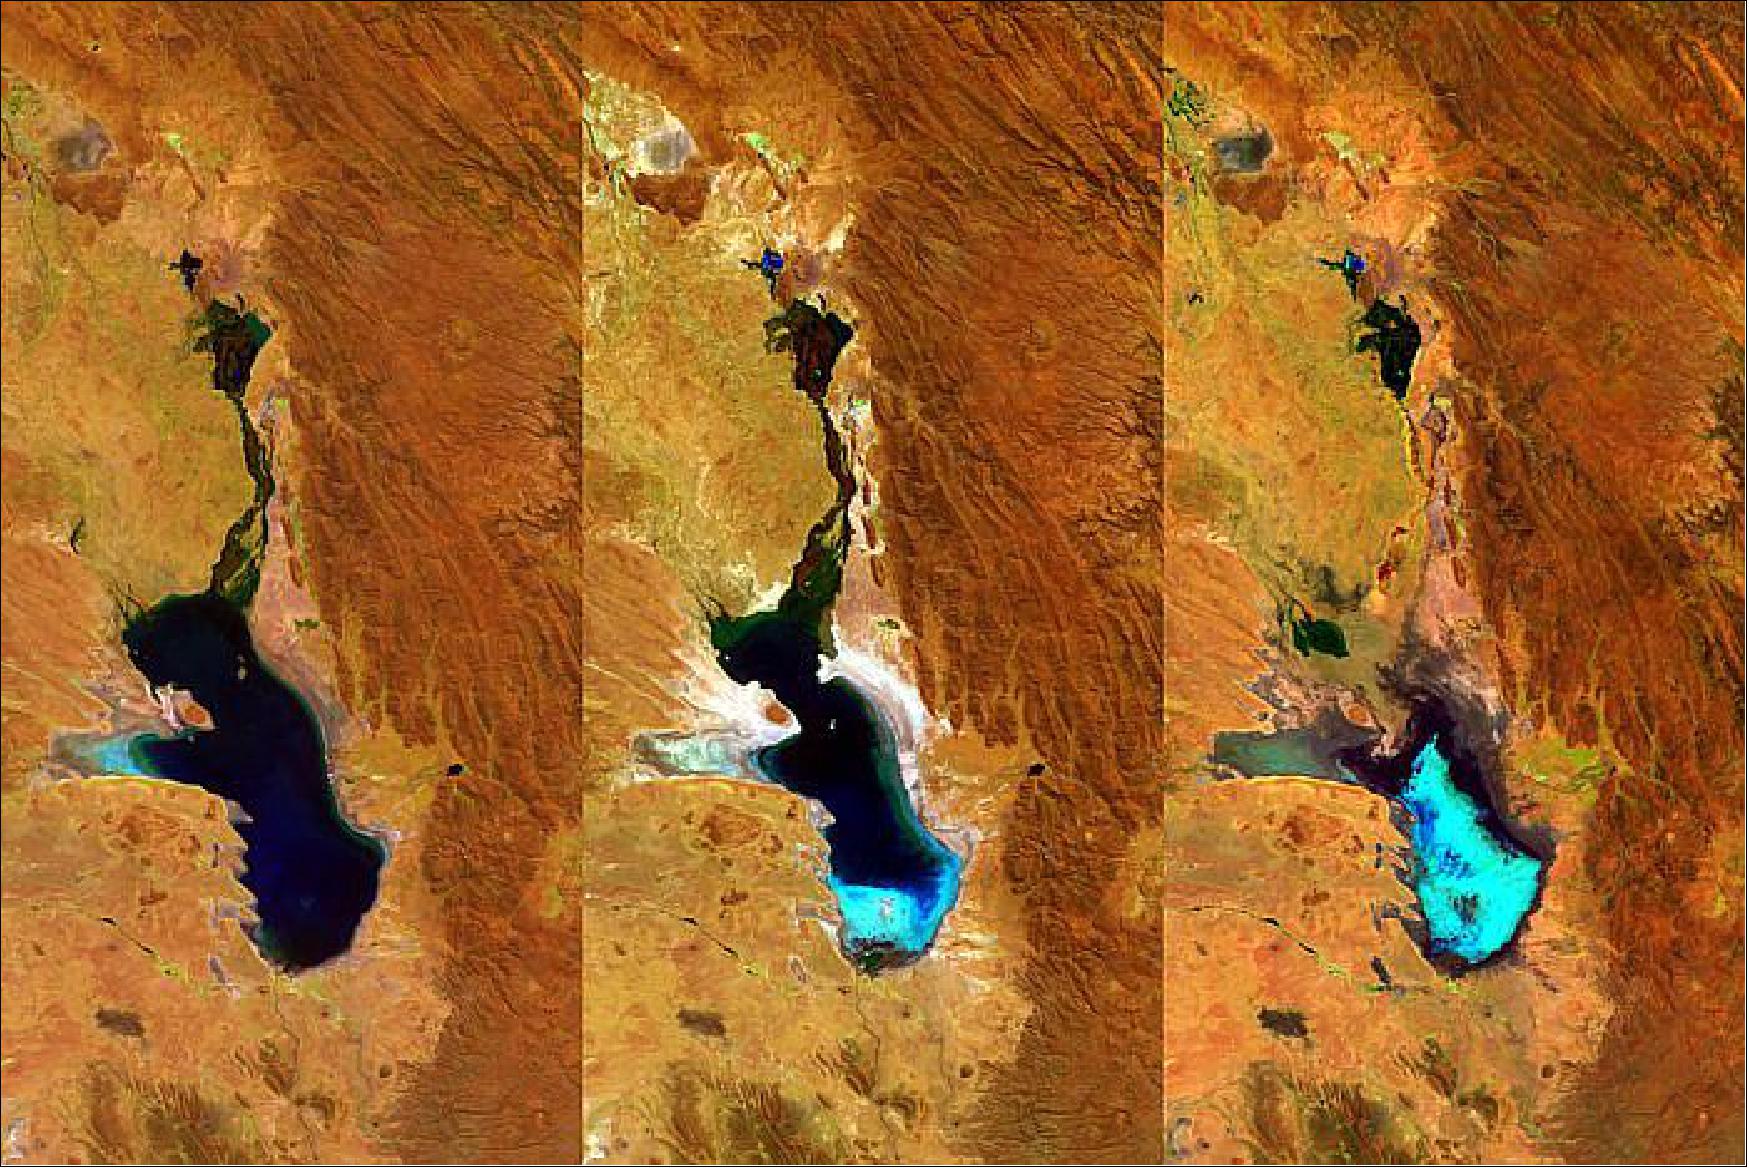 Figure 46: PROBA-V tracks Lake Poopó evaporation in Bolivia. The three 100-m resolution PROBA-V images shown here were acquired on 27 April 2014, 20 July 2015 and 22 January 2016 respectively (image credit: ESA, BELSPO, VITO) 65)